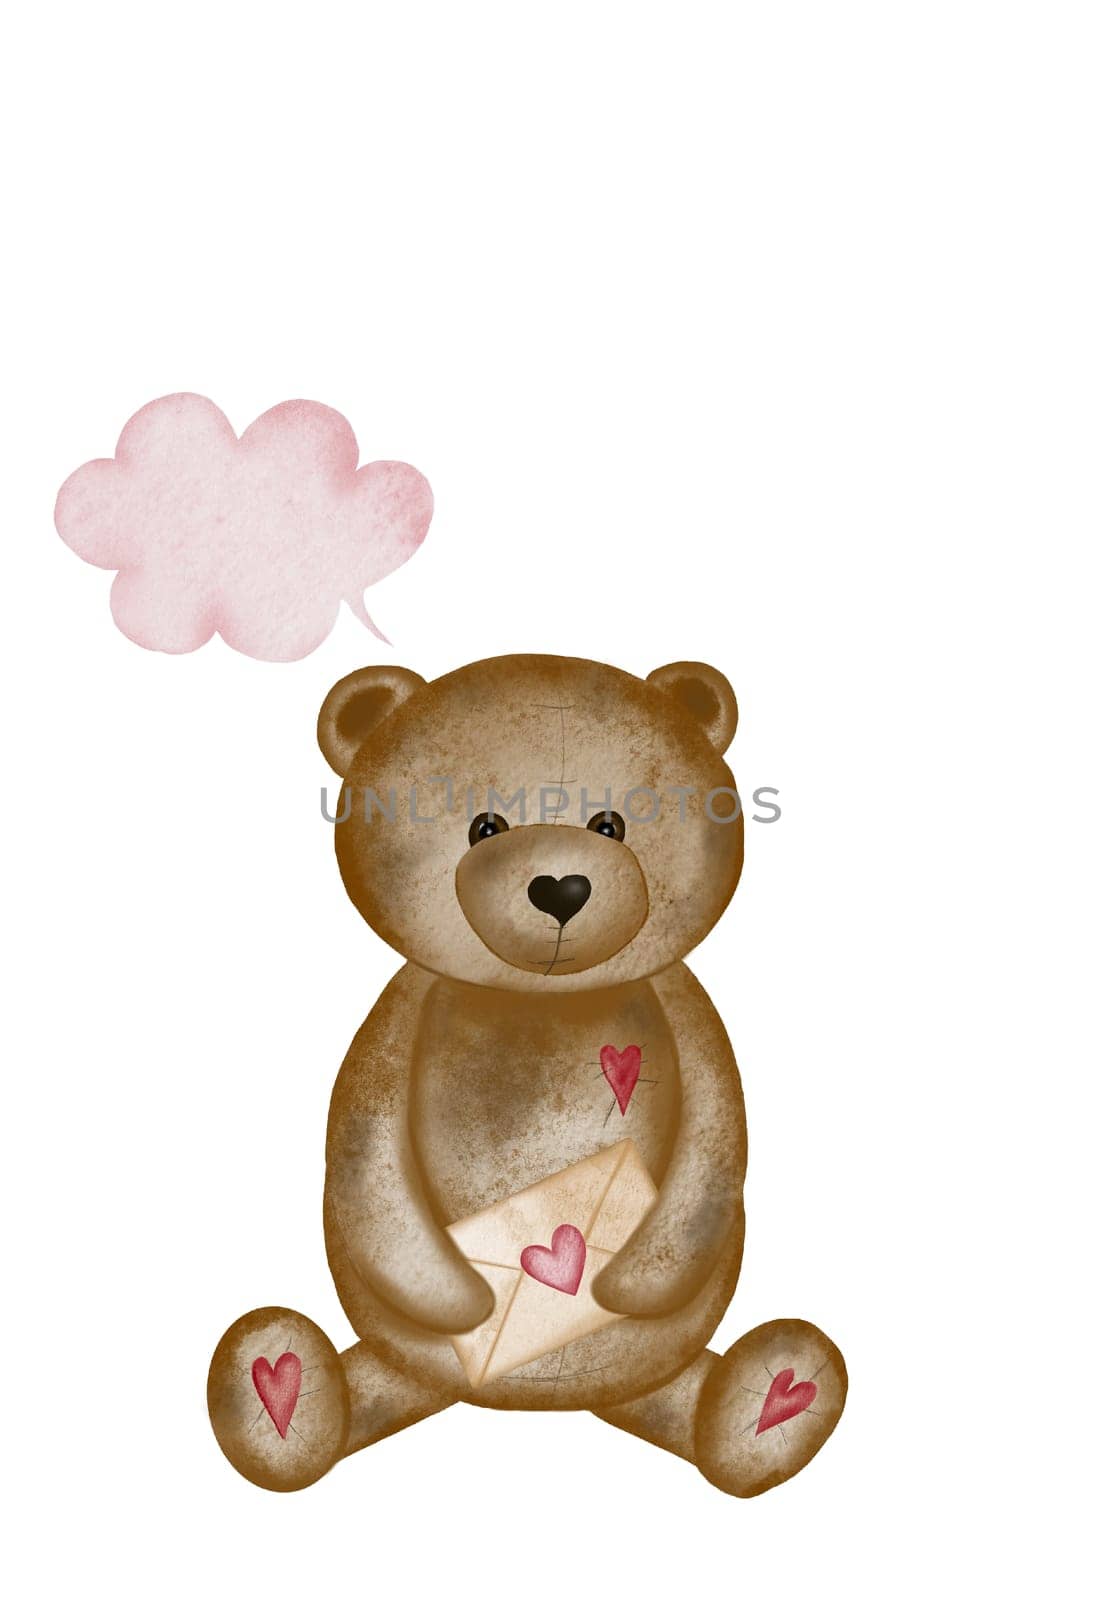 Watercolor drawing of a cute bear with a love letter. Valentine's day card template with cute teddy bear. Holiday card for loved ones.